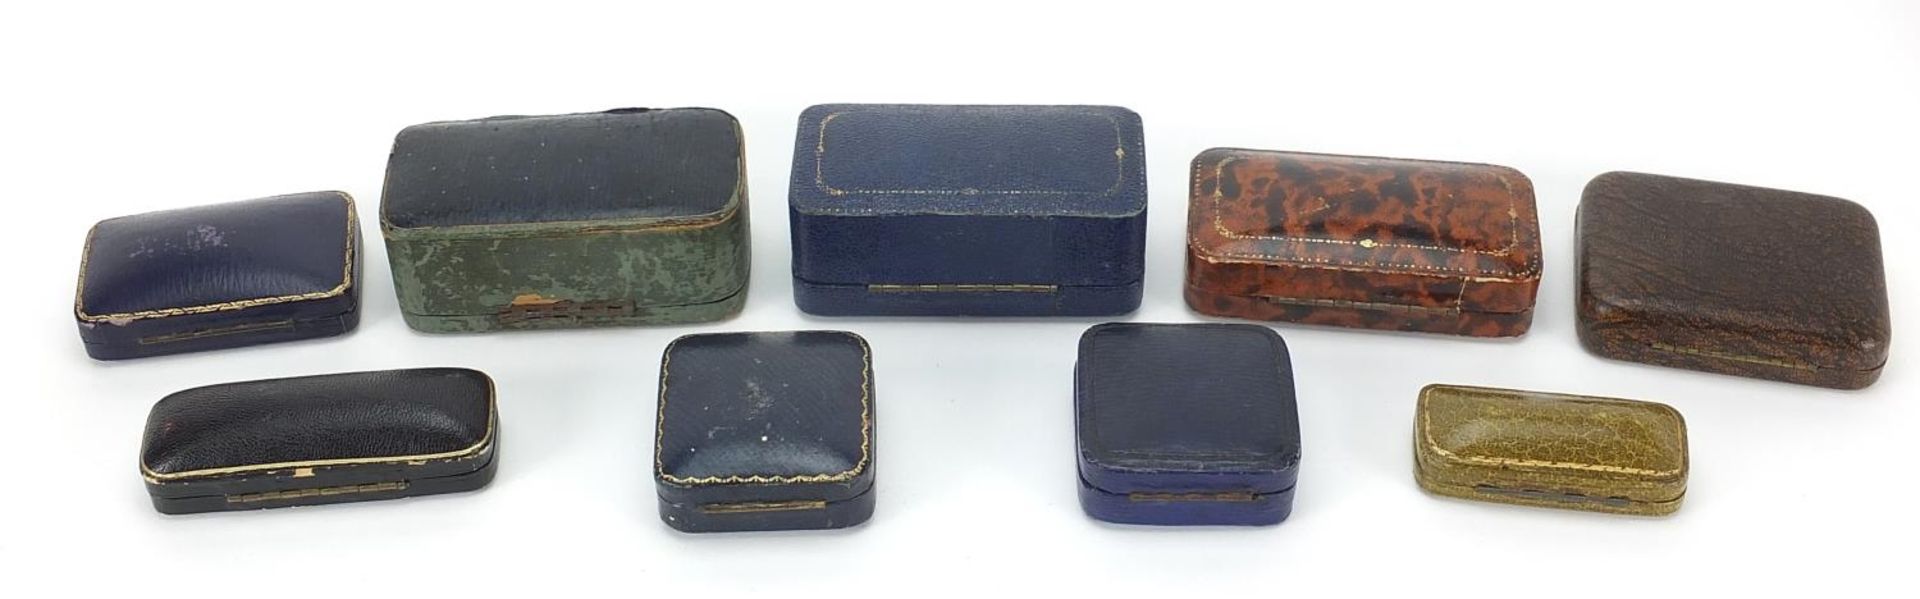 Antique and later jewellery boxes including L J Ewen, Hones, John Bagshaw & Sons Liverpool and W S - Image 5 of 5